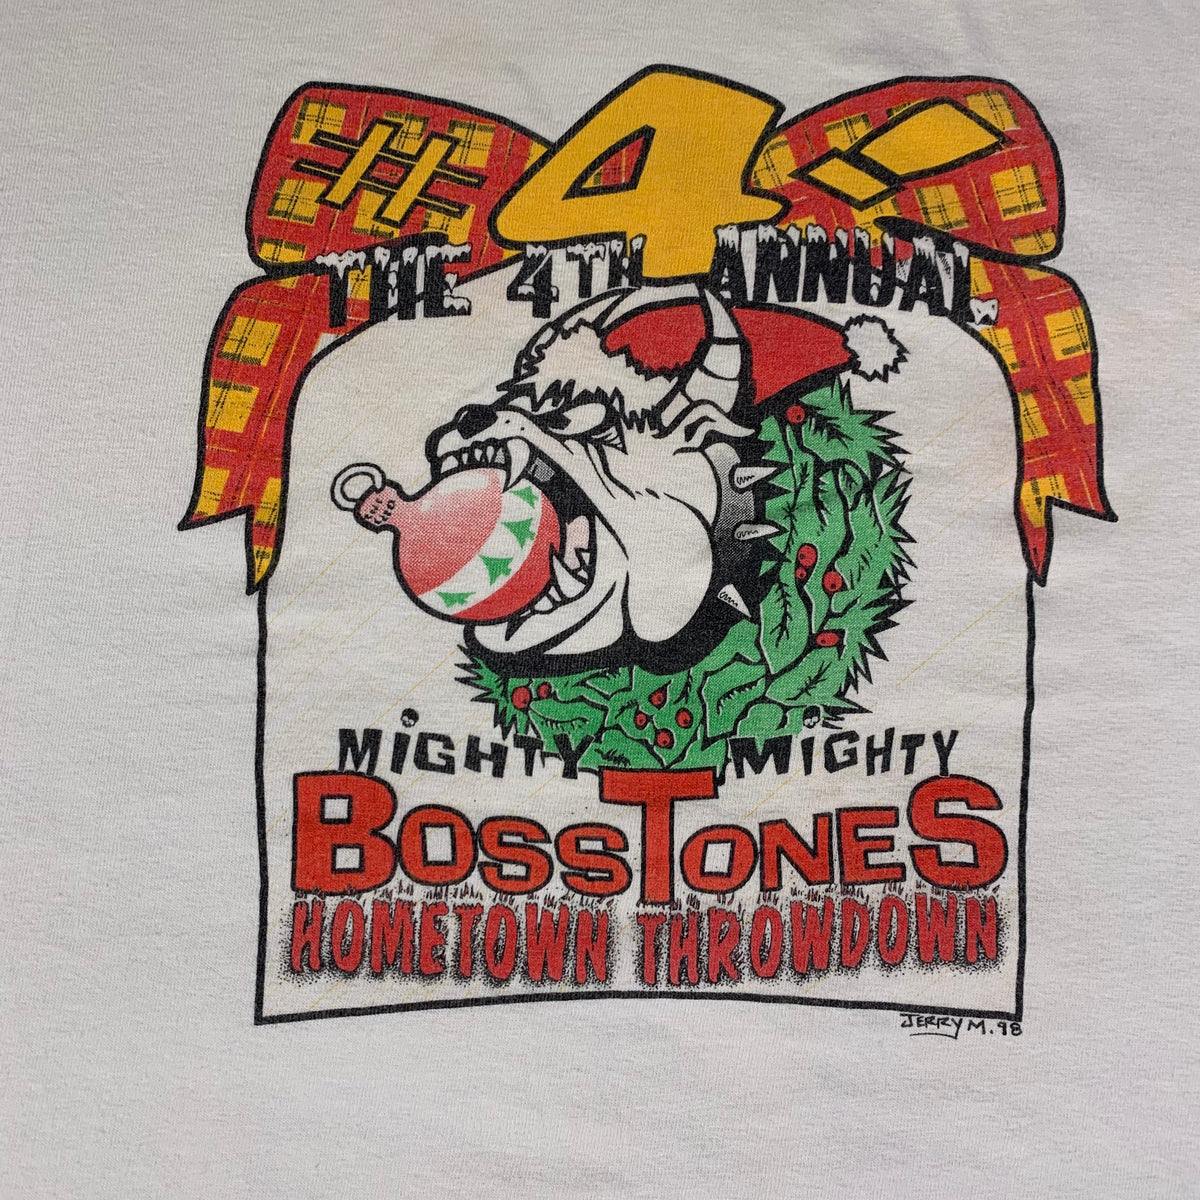 Vintage Mighty Mighty Bosstones &quot;Hometown Throwdown&quot; T-Shirt